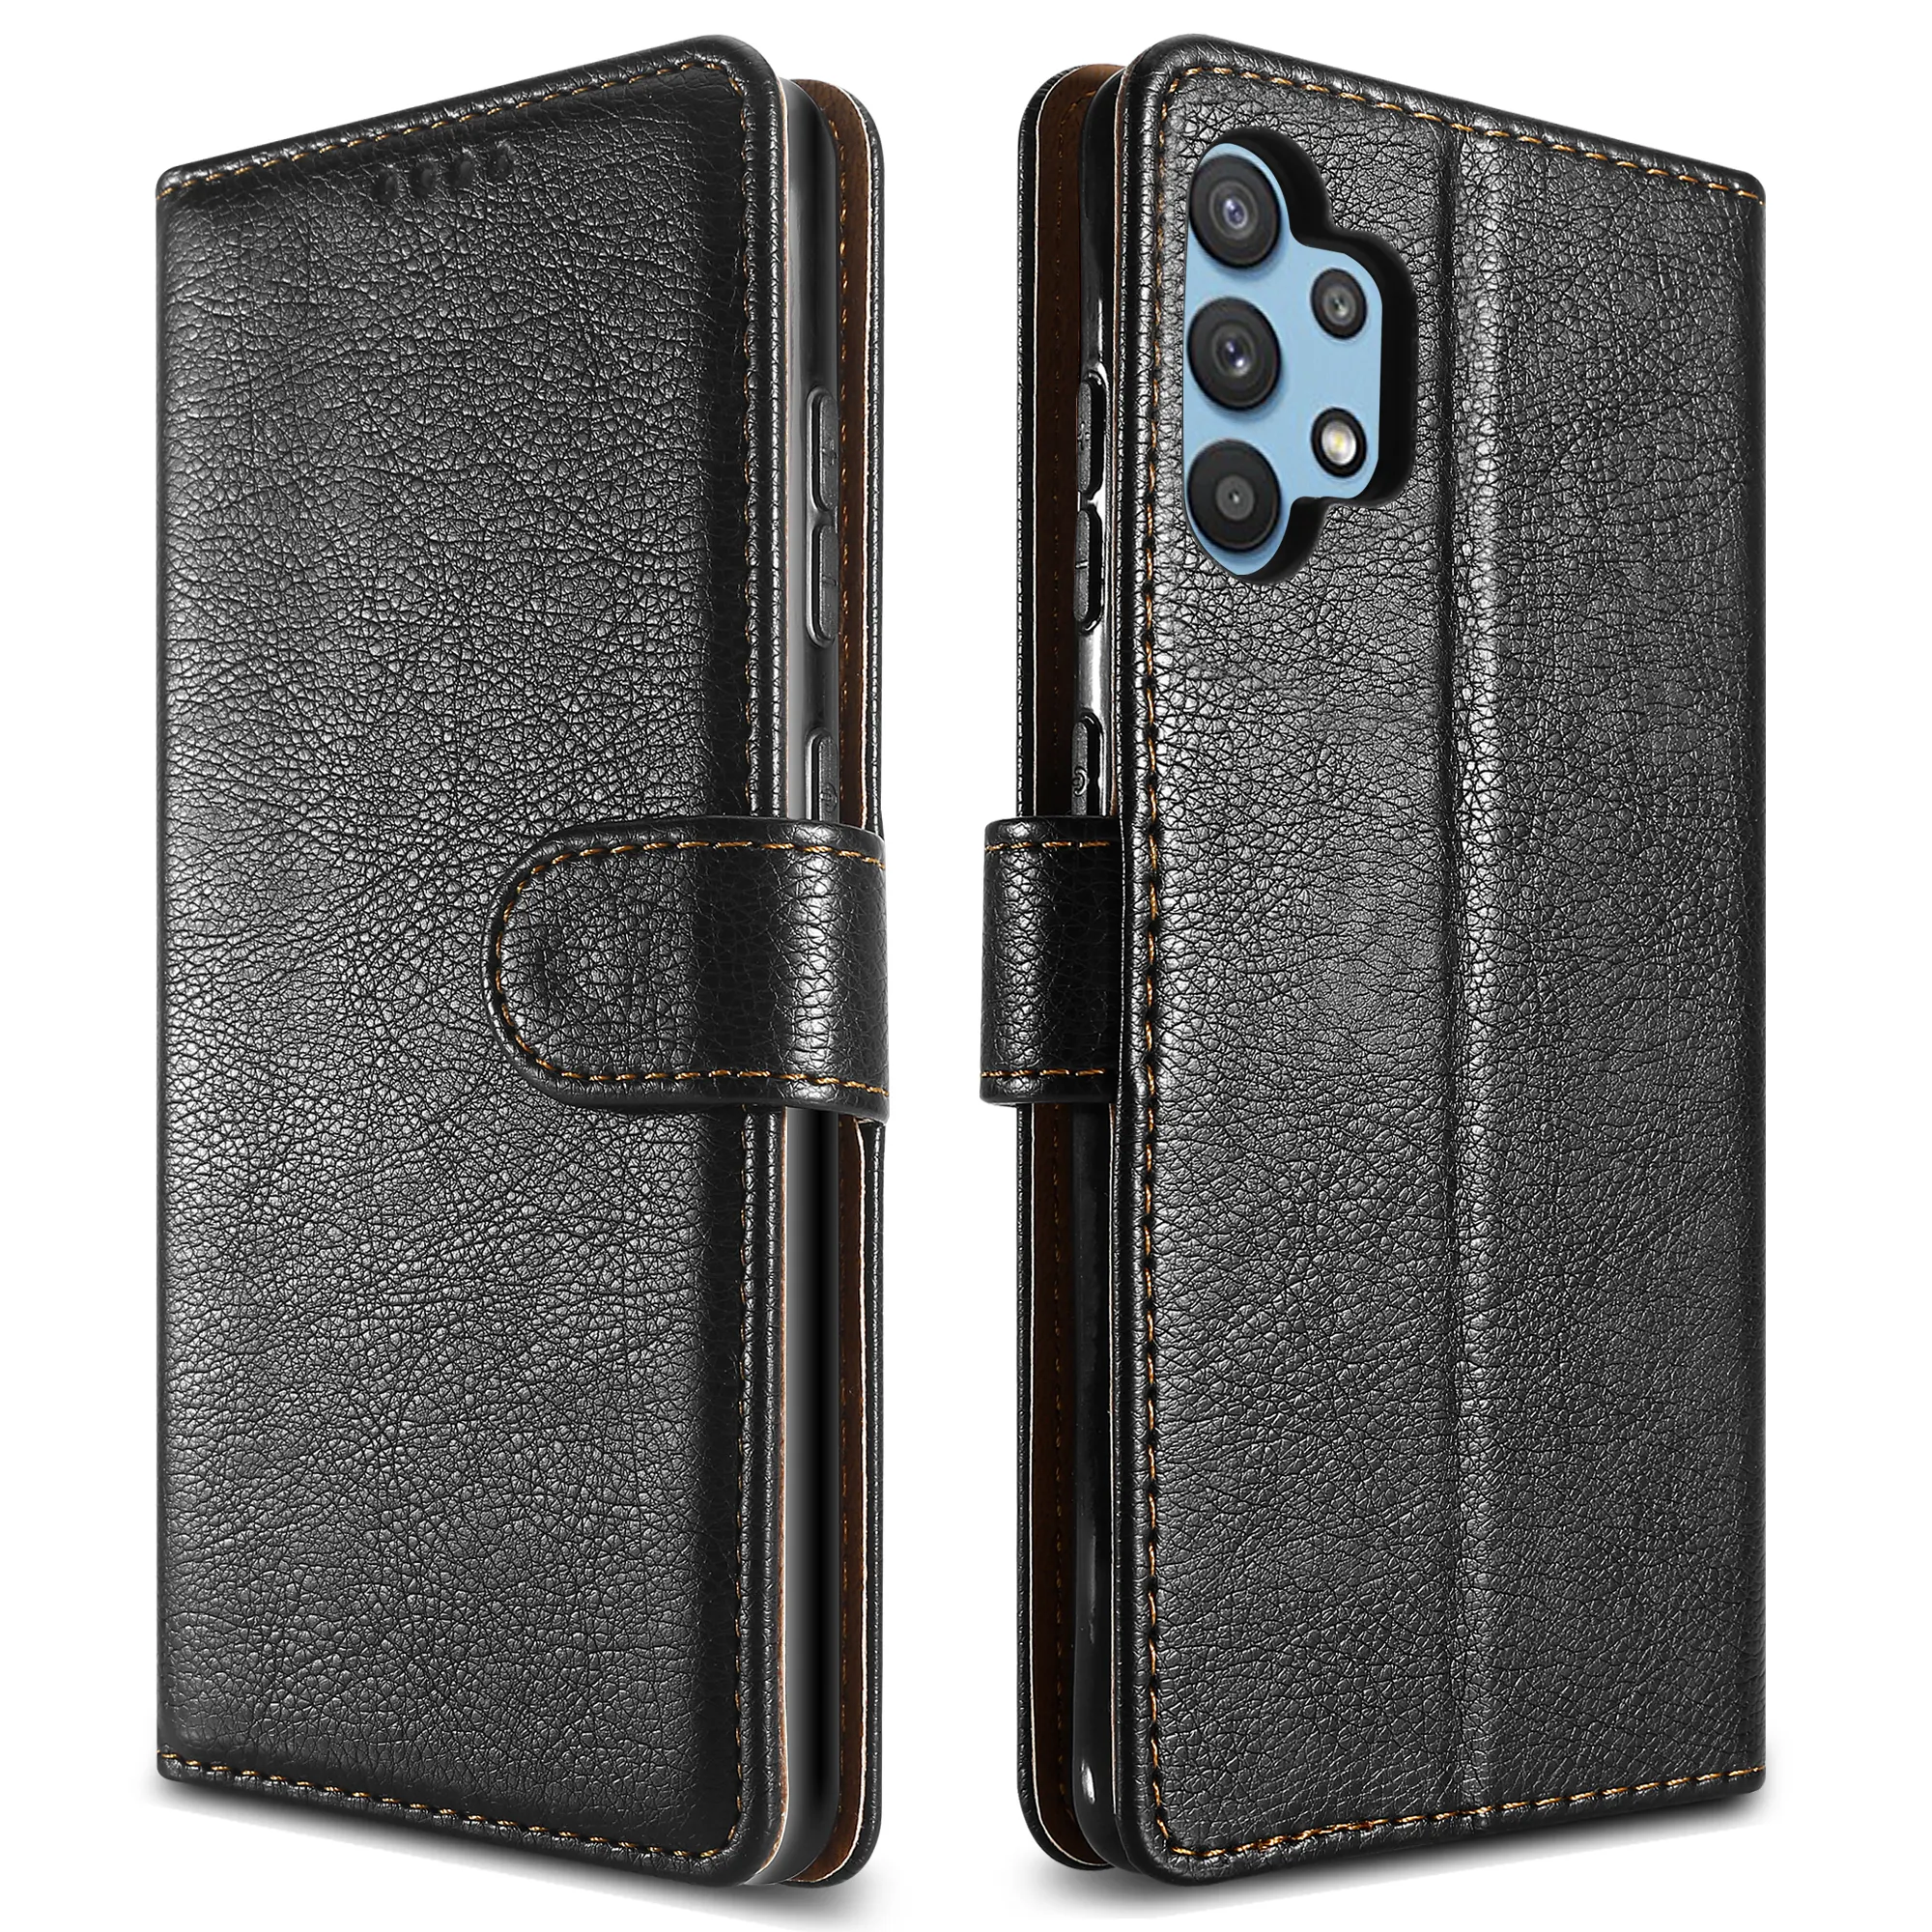 Pu leather Flip Case with Card Holders Wallet Kickstand Shockproof TPU Full Protection Cover Phone Case for Samsung A32 5G